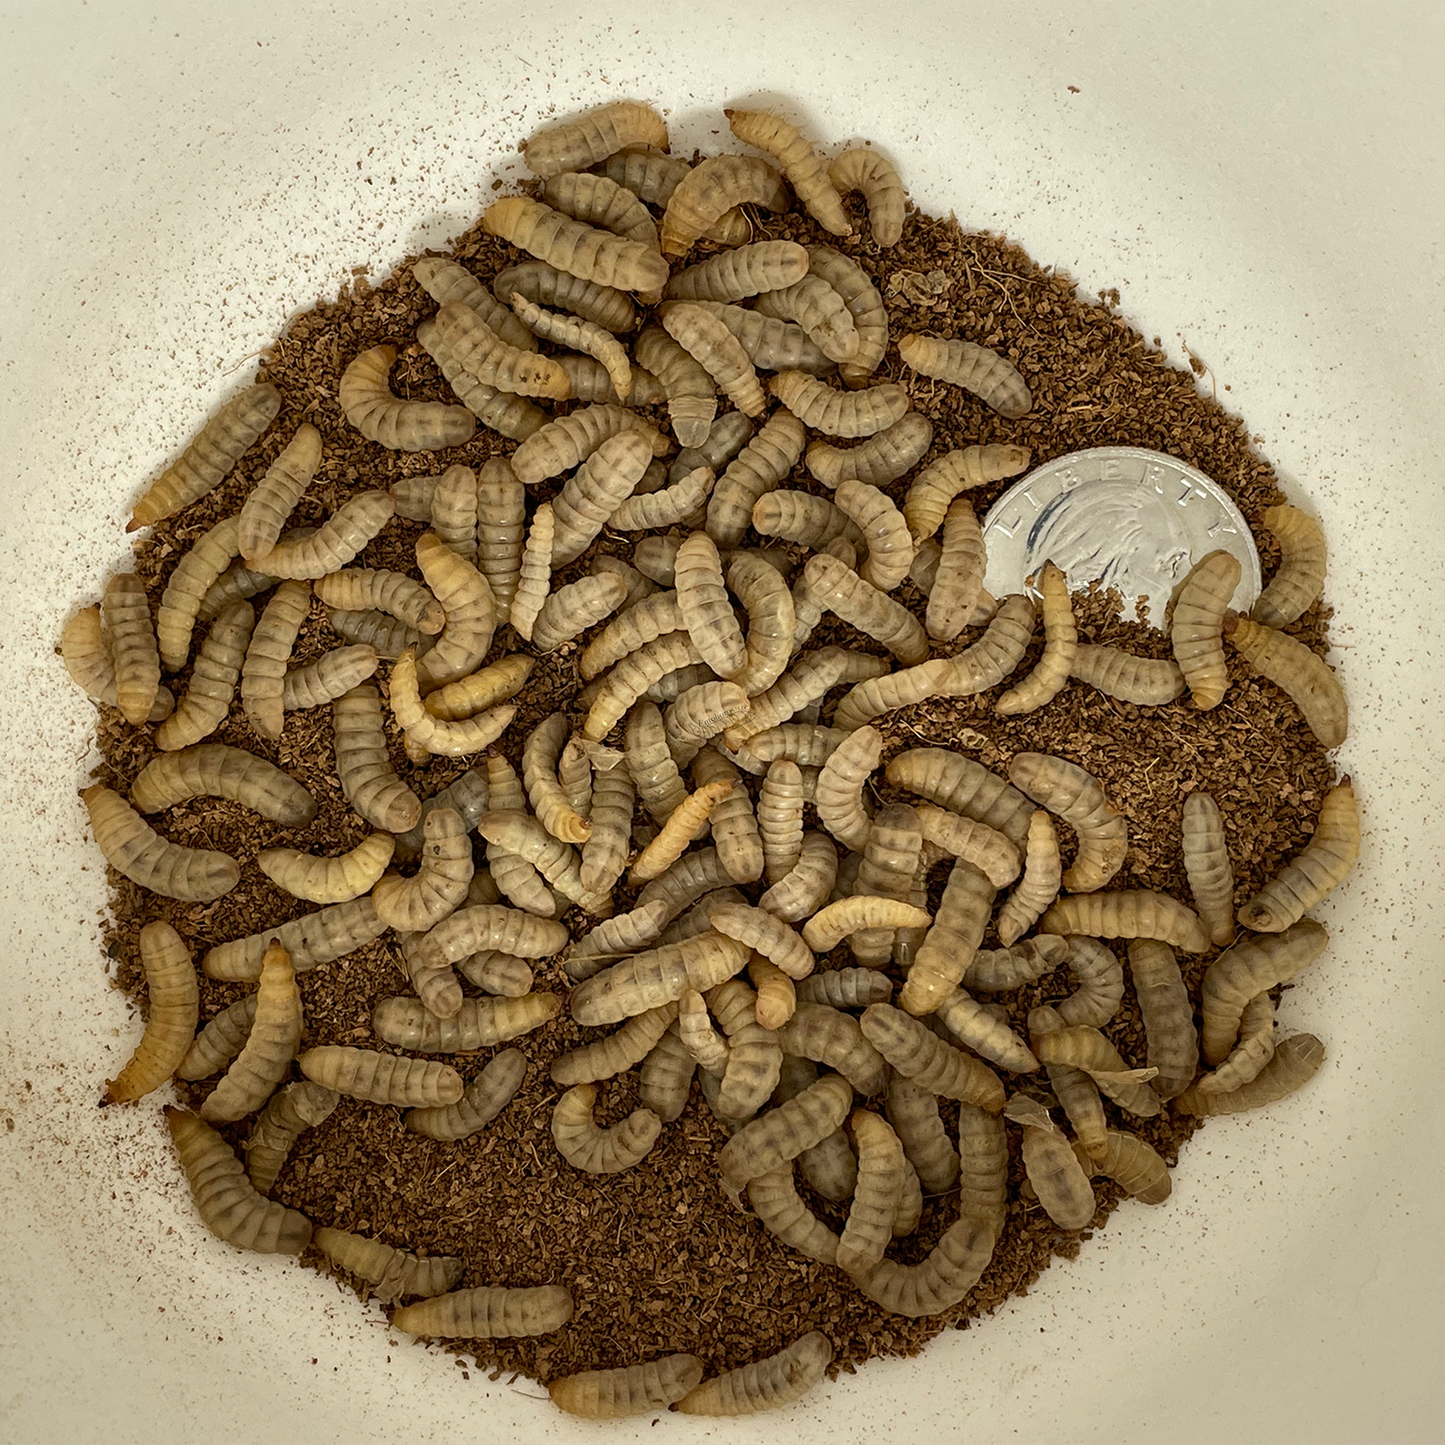 Container with Medium Black Soldier Fly larvae in a substrate with a quarter for scale.